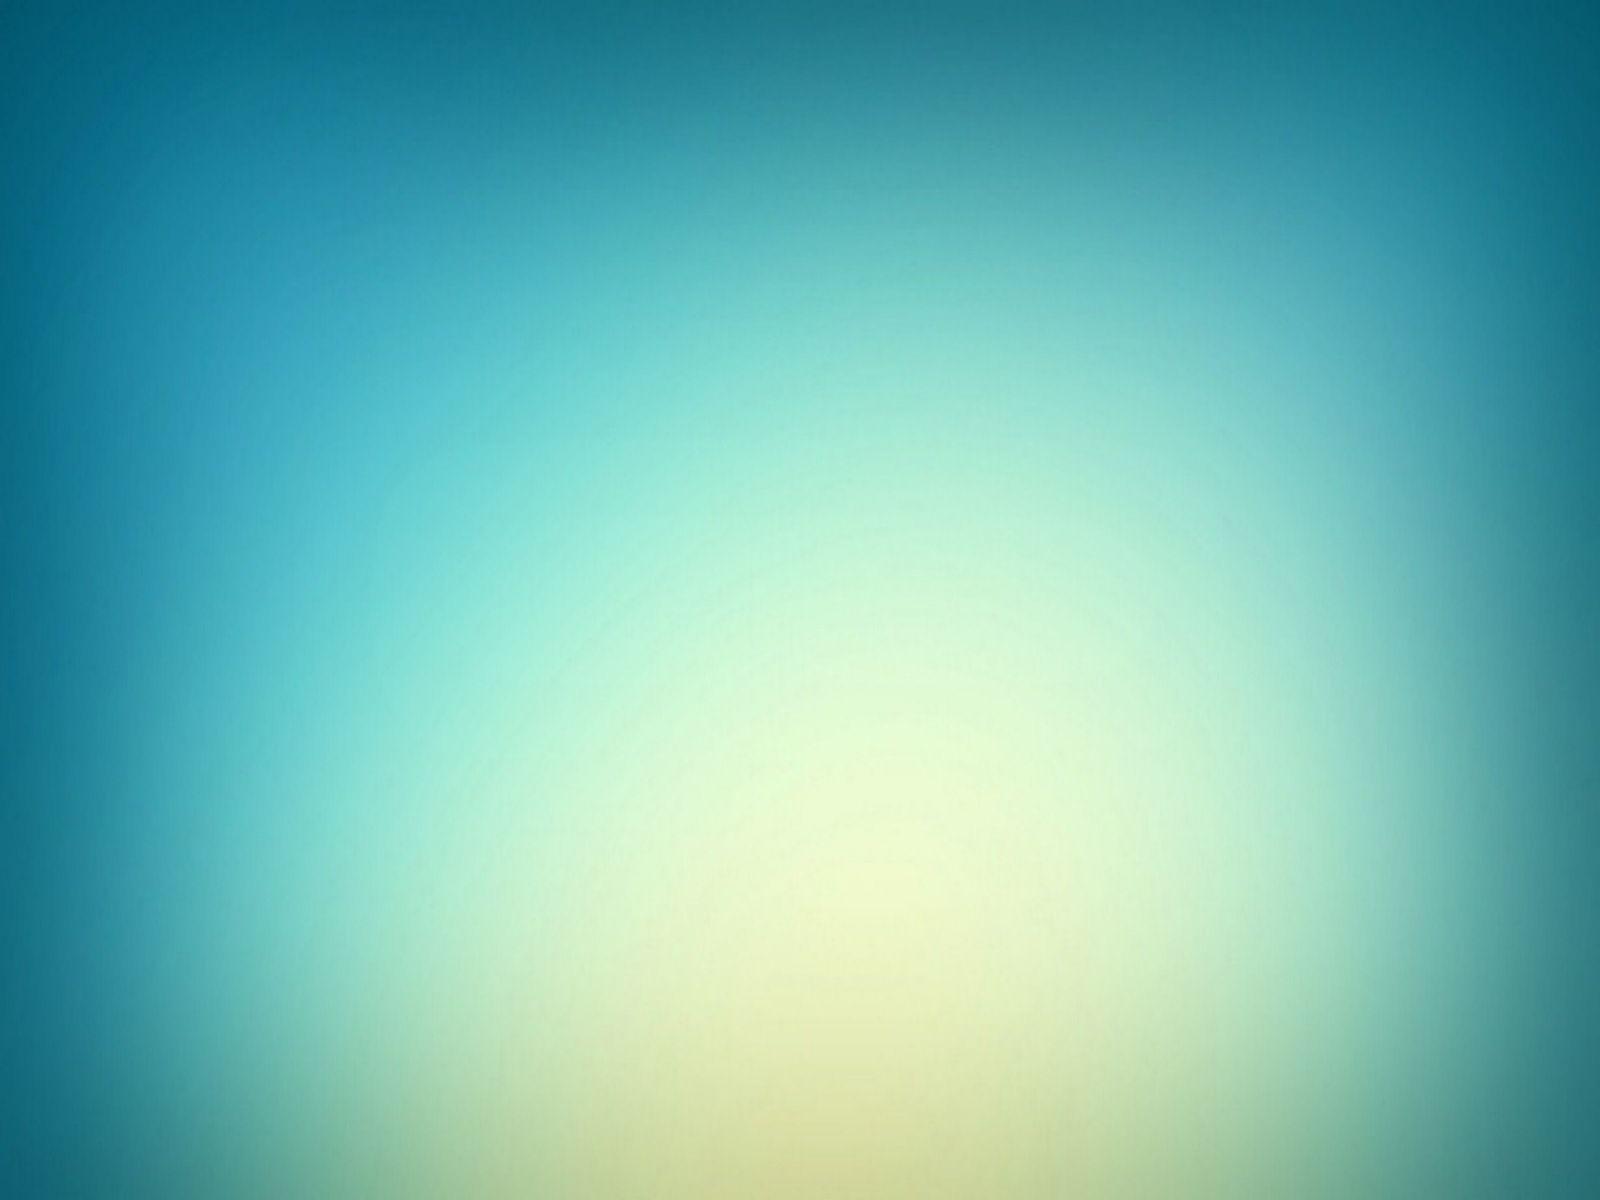 Simple Background 17275 1600x1200 px